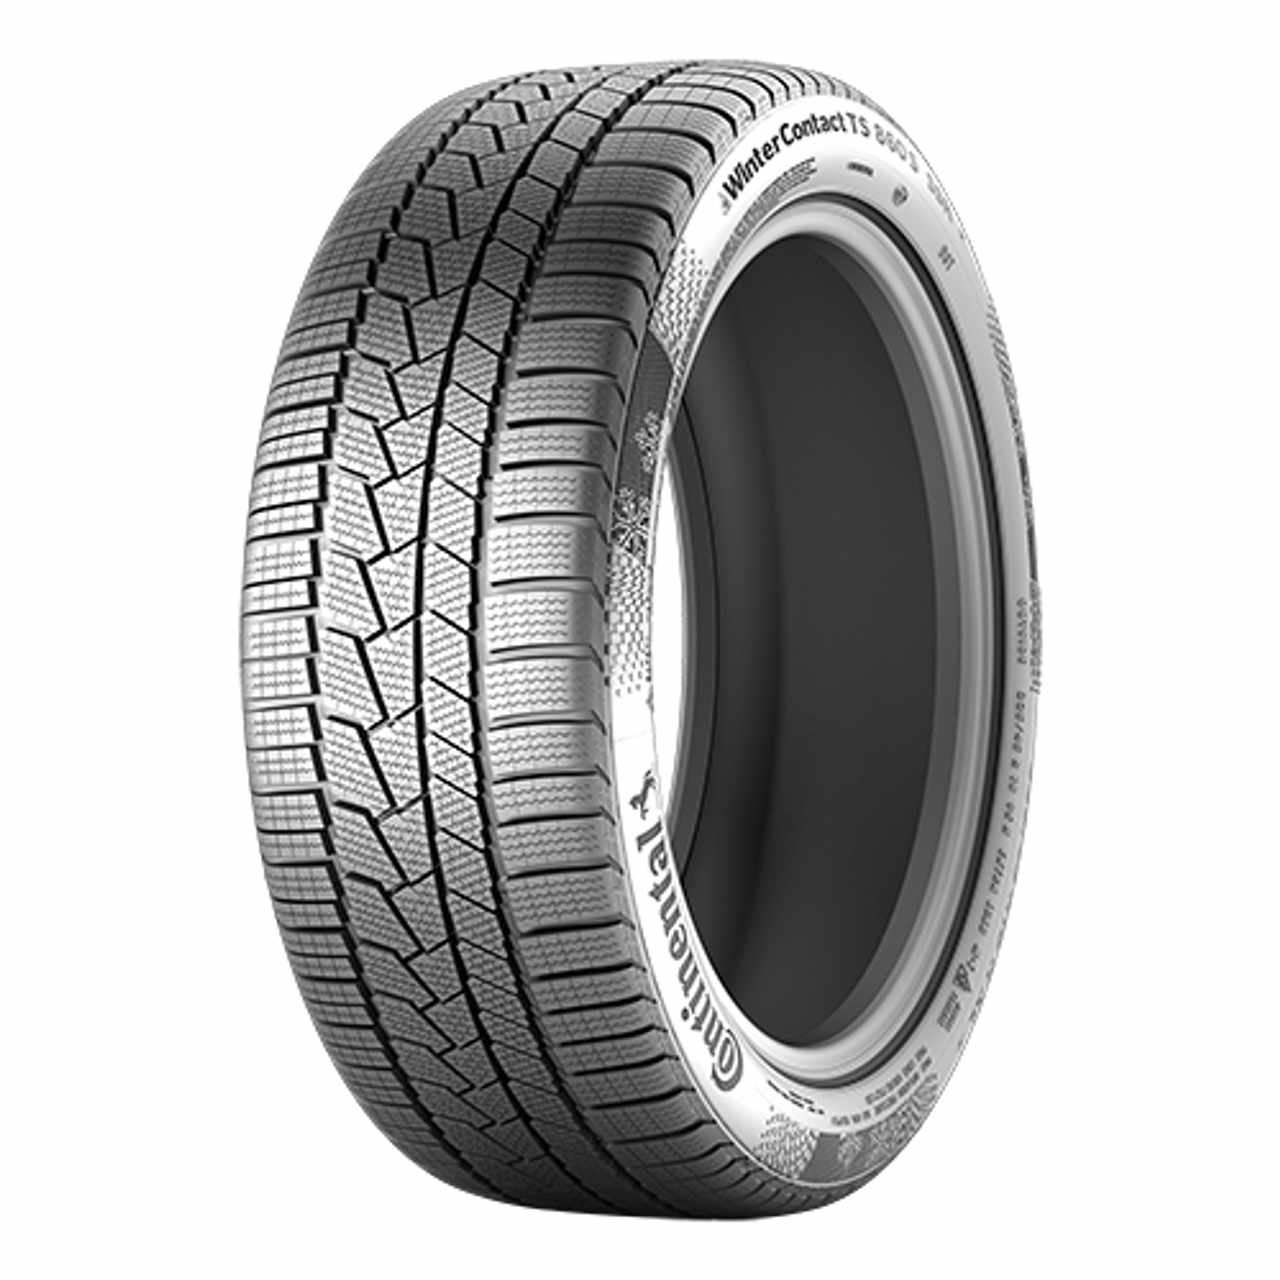 CONTINENTAL WINTERCONTACT TS 860 S (T0) (EVc) 235/45R18 98V FR BSW XL